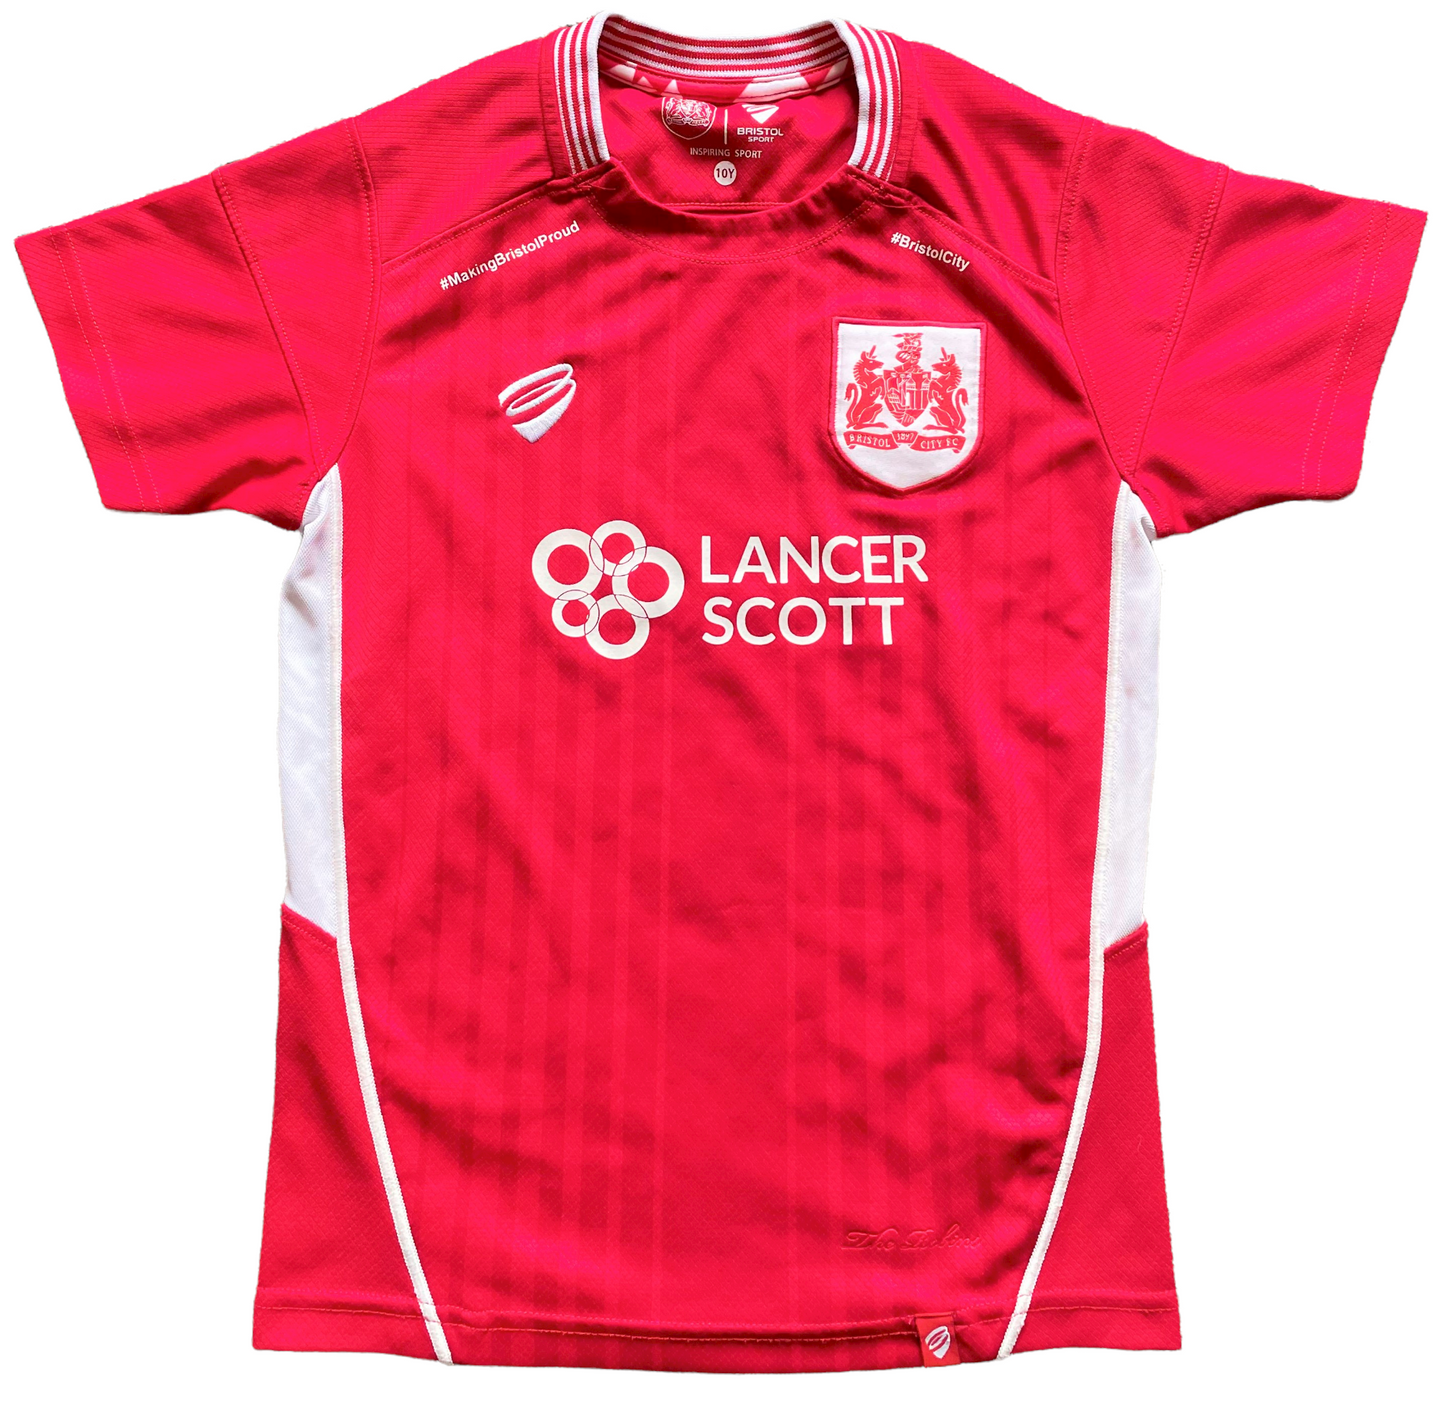 2016-17 Bristol City Home Shirt (excellent) Childs 10 years.